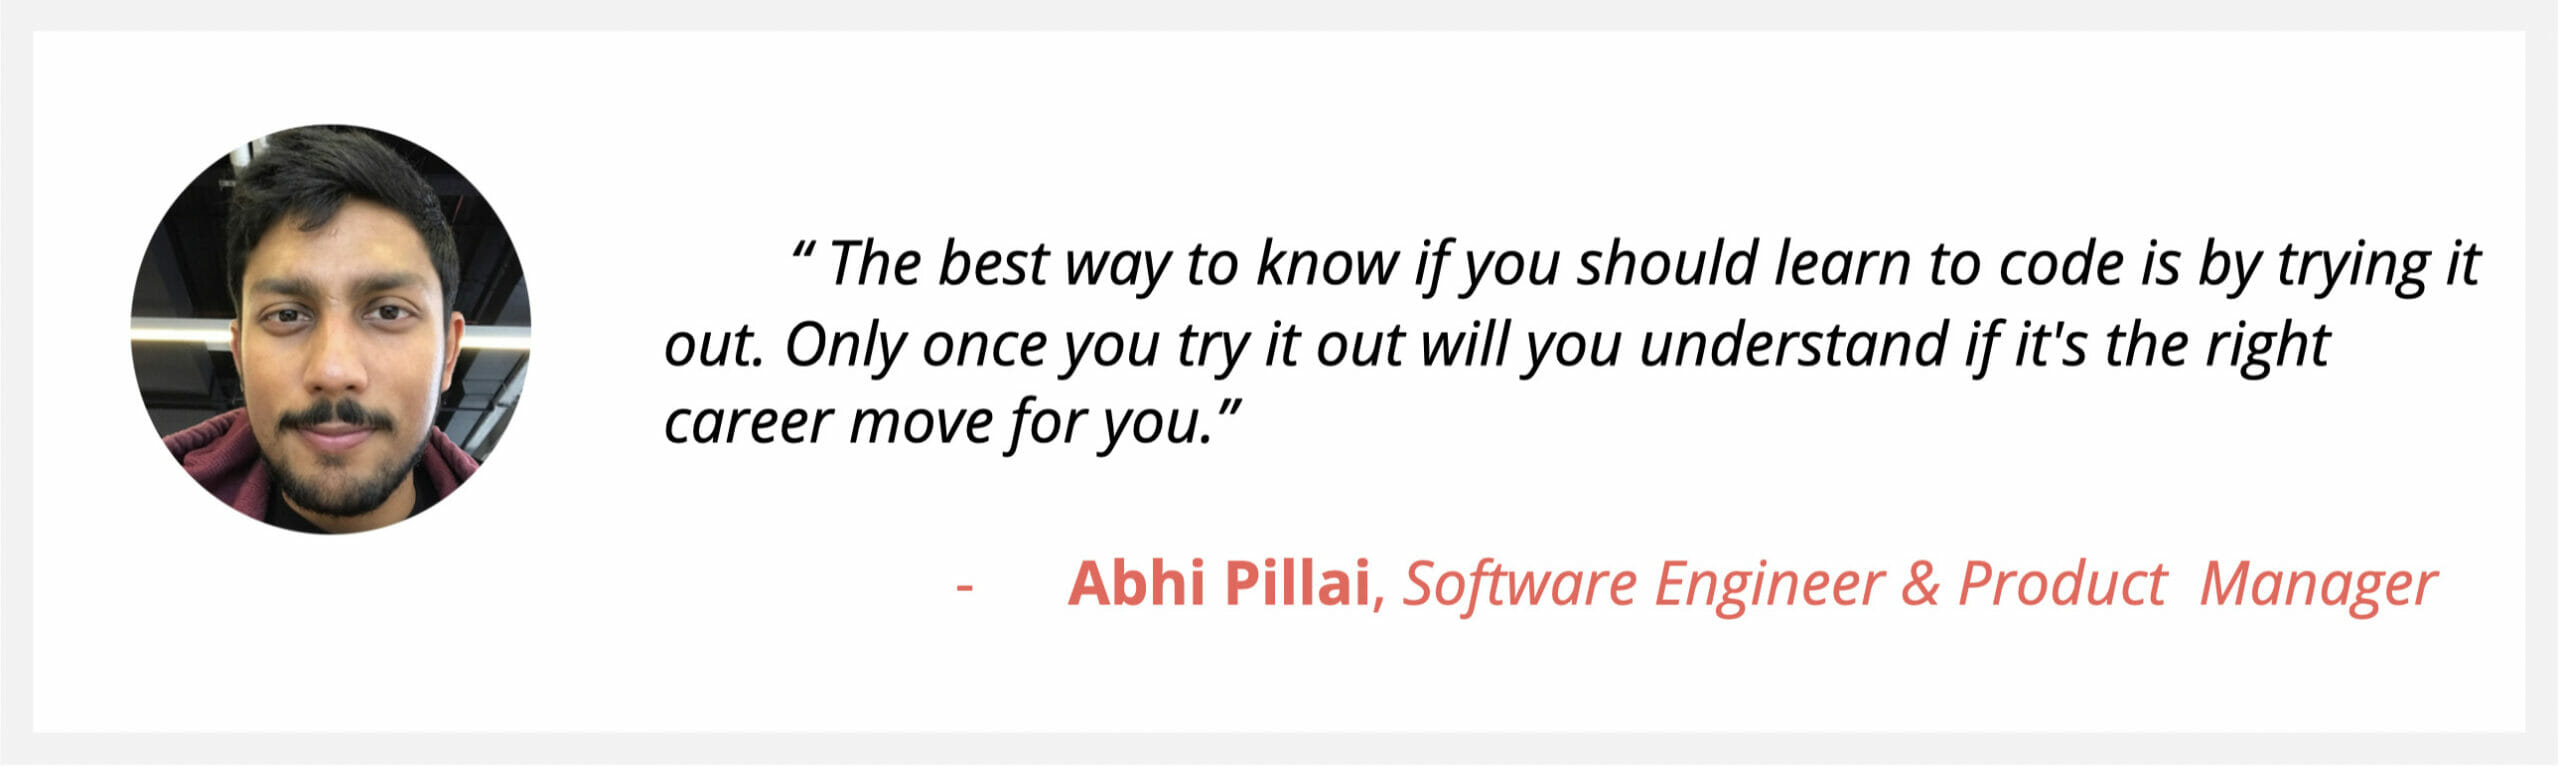 Software Engineer & PM Abhi Pillai, says “The best way to know if you should learn to code is by trying it out. Only once you try it out will you understand if it's the right career move for you.”